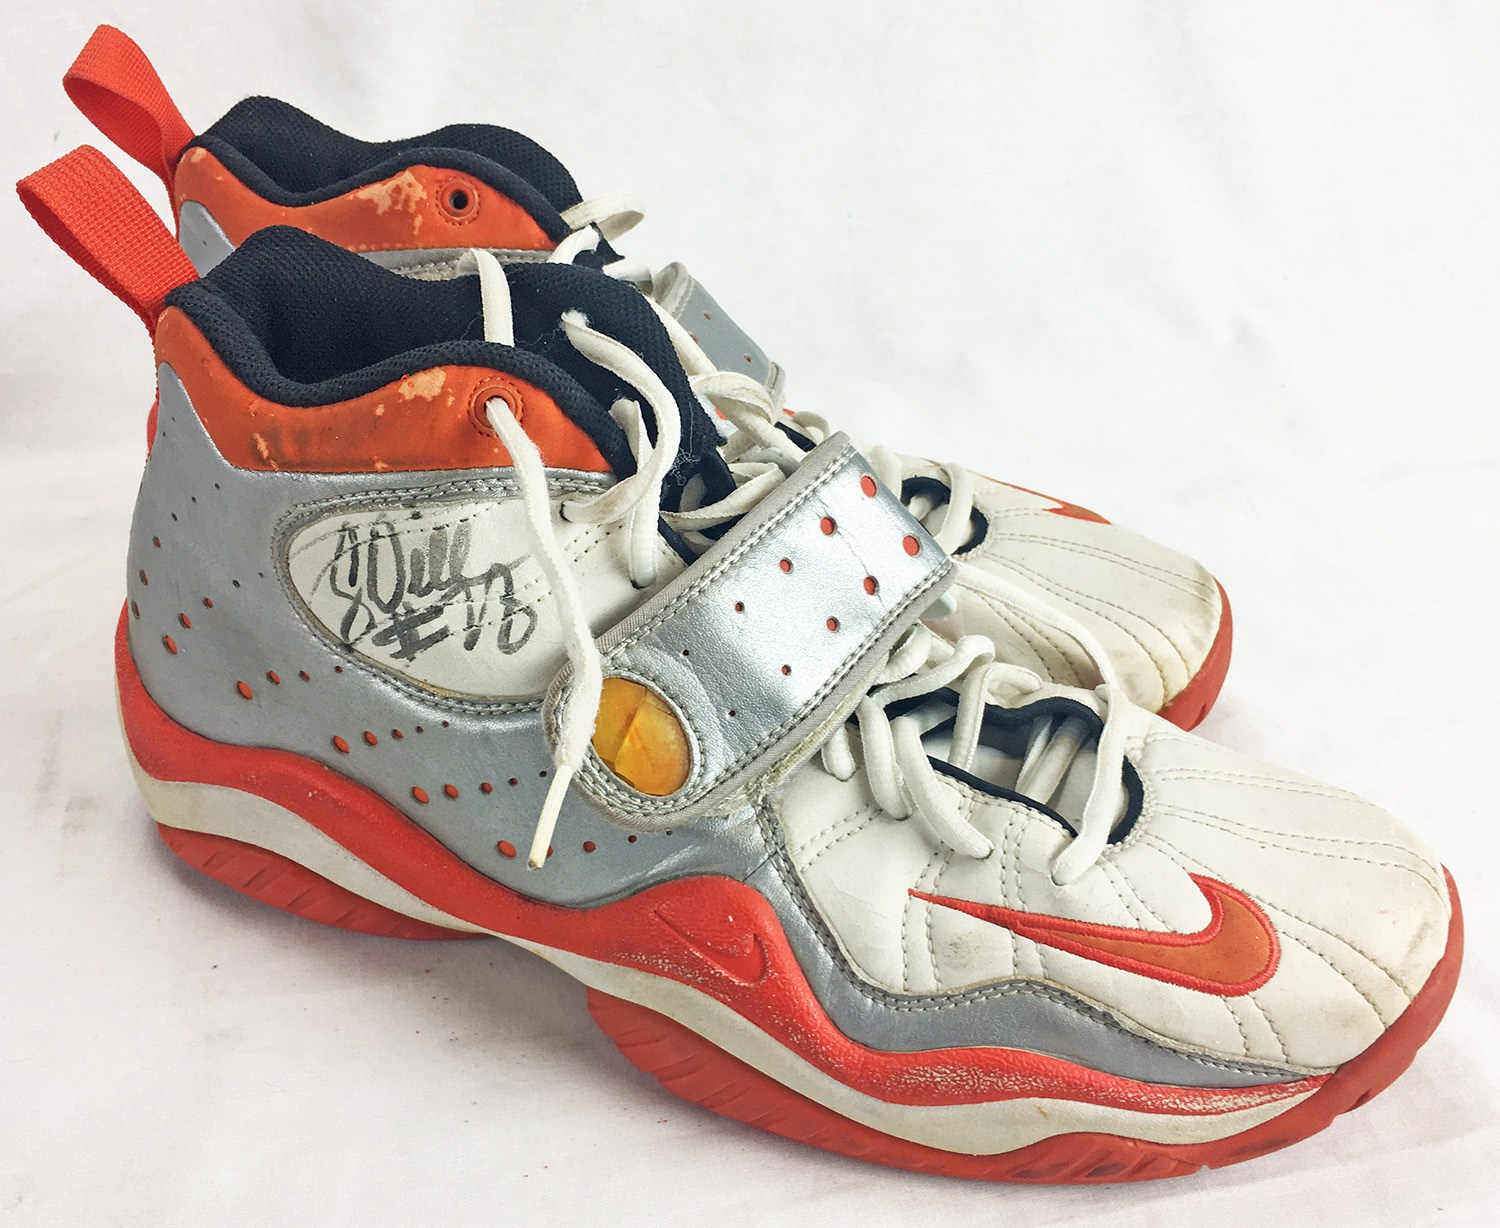 Football - Corey Dillon Signed Game Worn Cleats